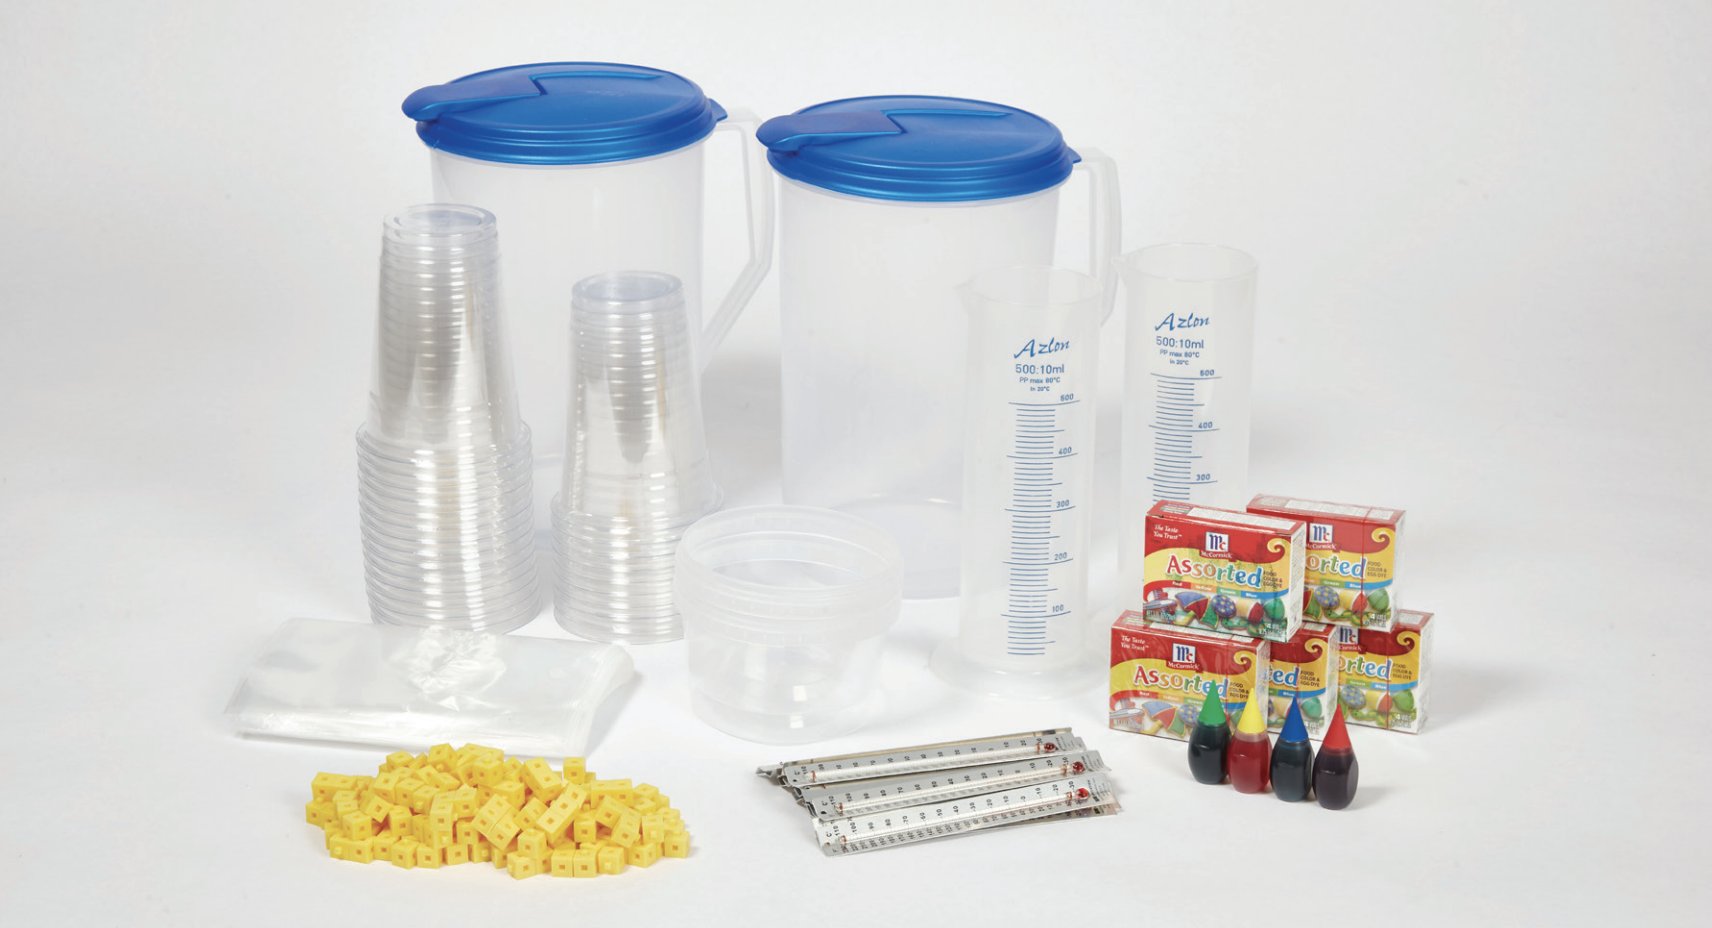 Assorted laboratory supplies including beakers, measuring cylinders, test tubes, pipettes, thermometers, and chemical reagents on a white background.